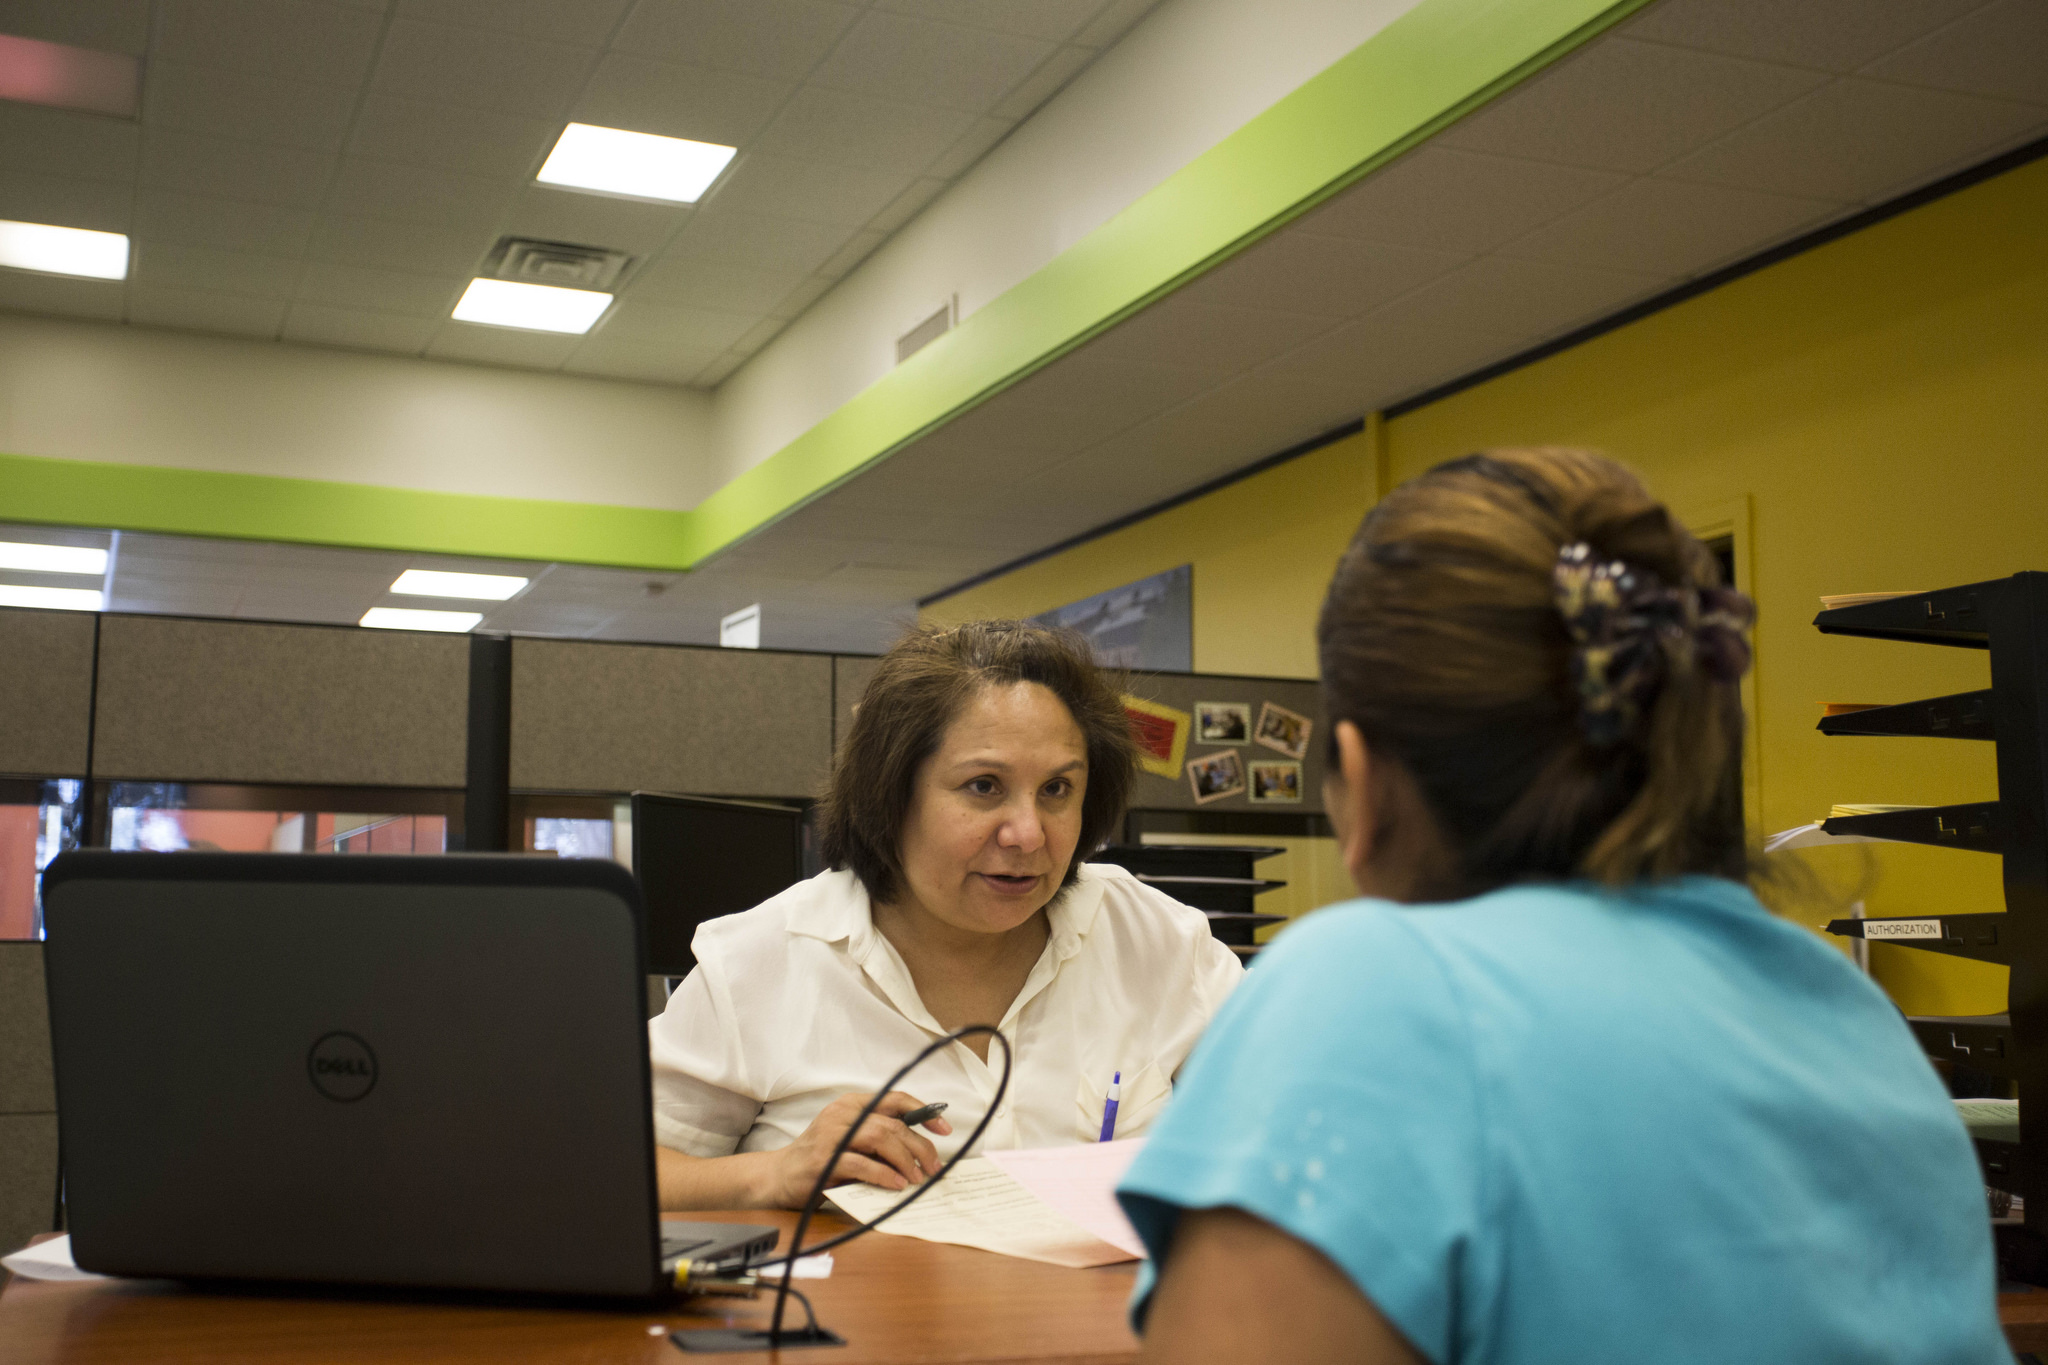 Nora Cadena, of Insure Central Texas at Foundation Communities, assists with enrollment in the Affordable Care Act at a Foundation Communities Community Tax Center in North Austin.